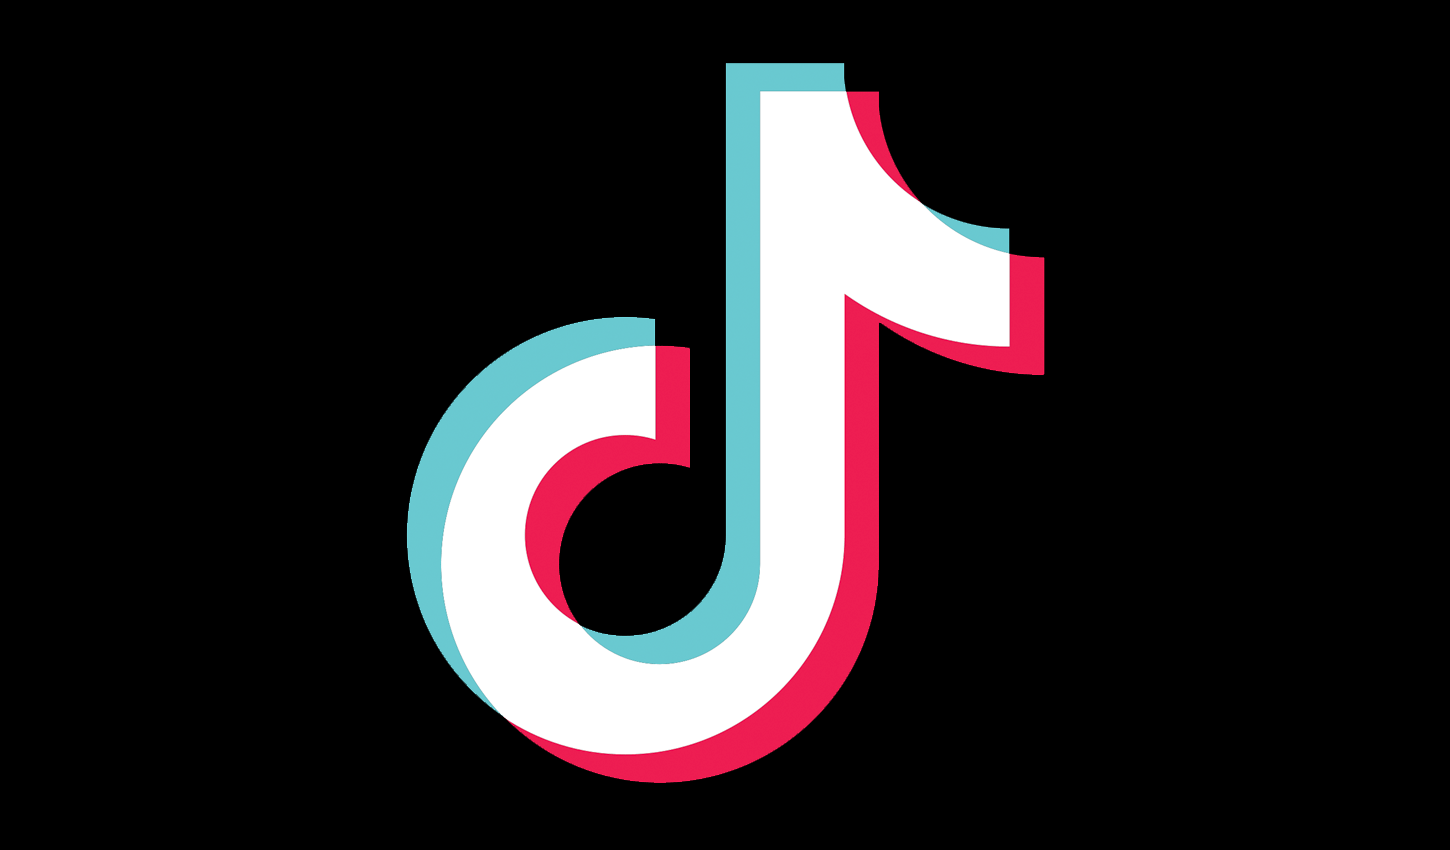 how to download tiktok app after ban